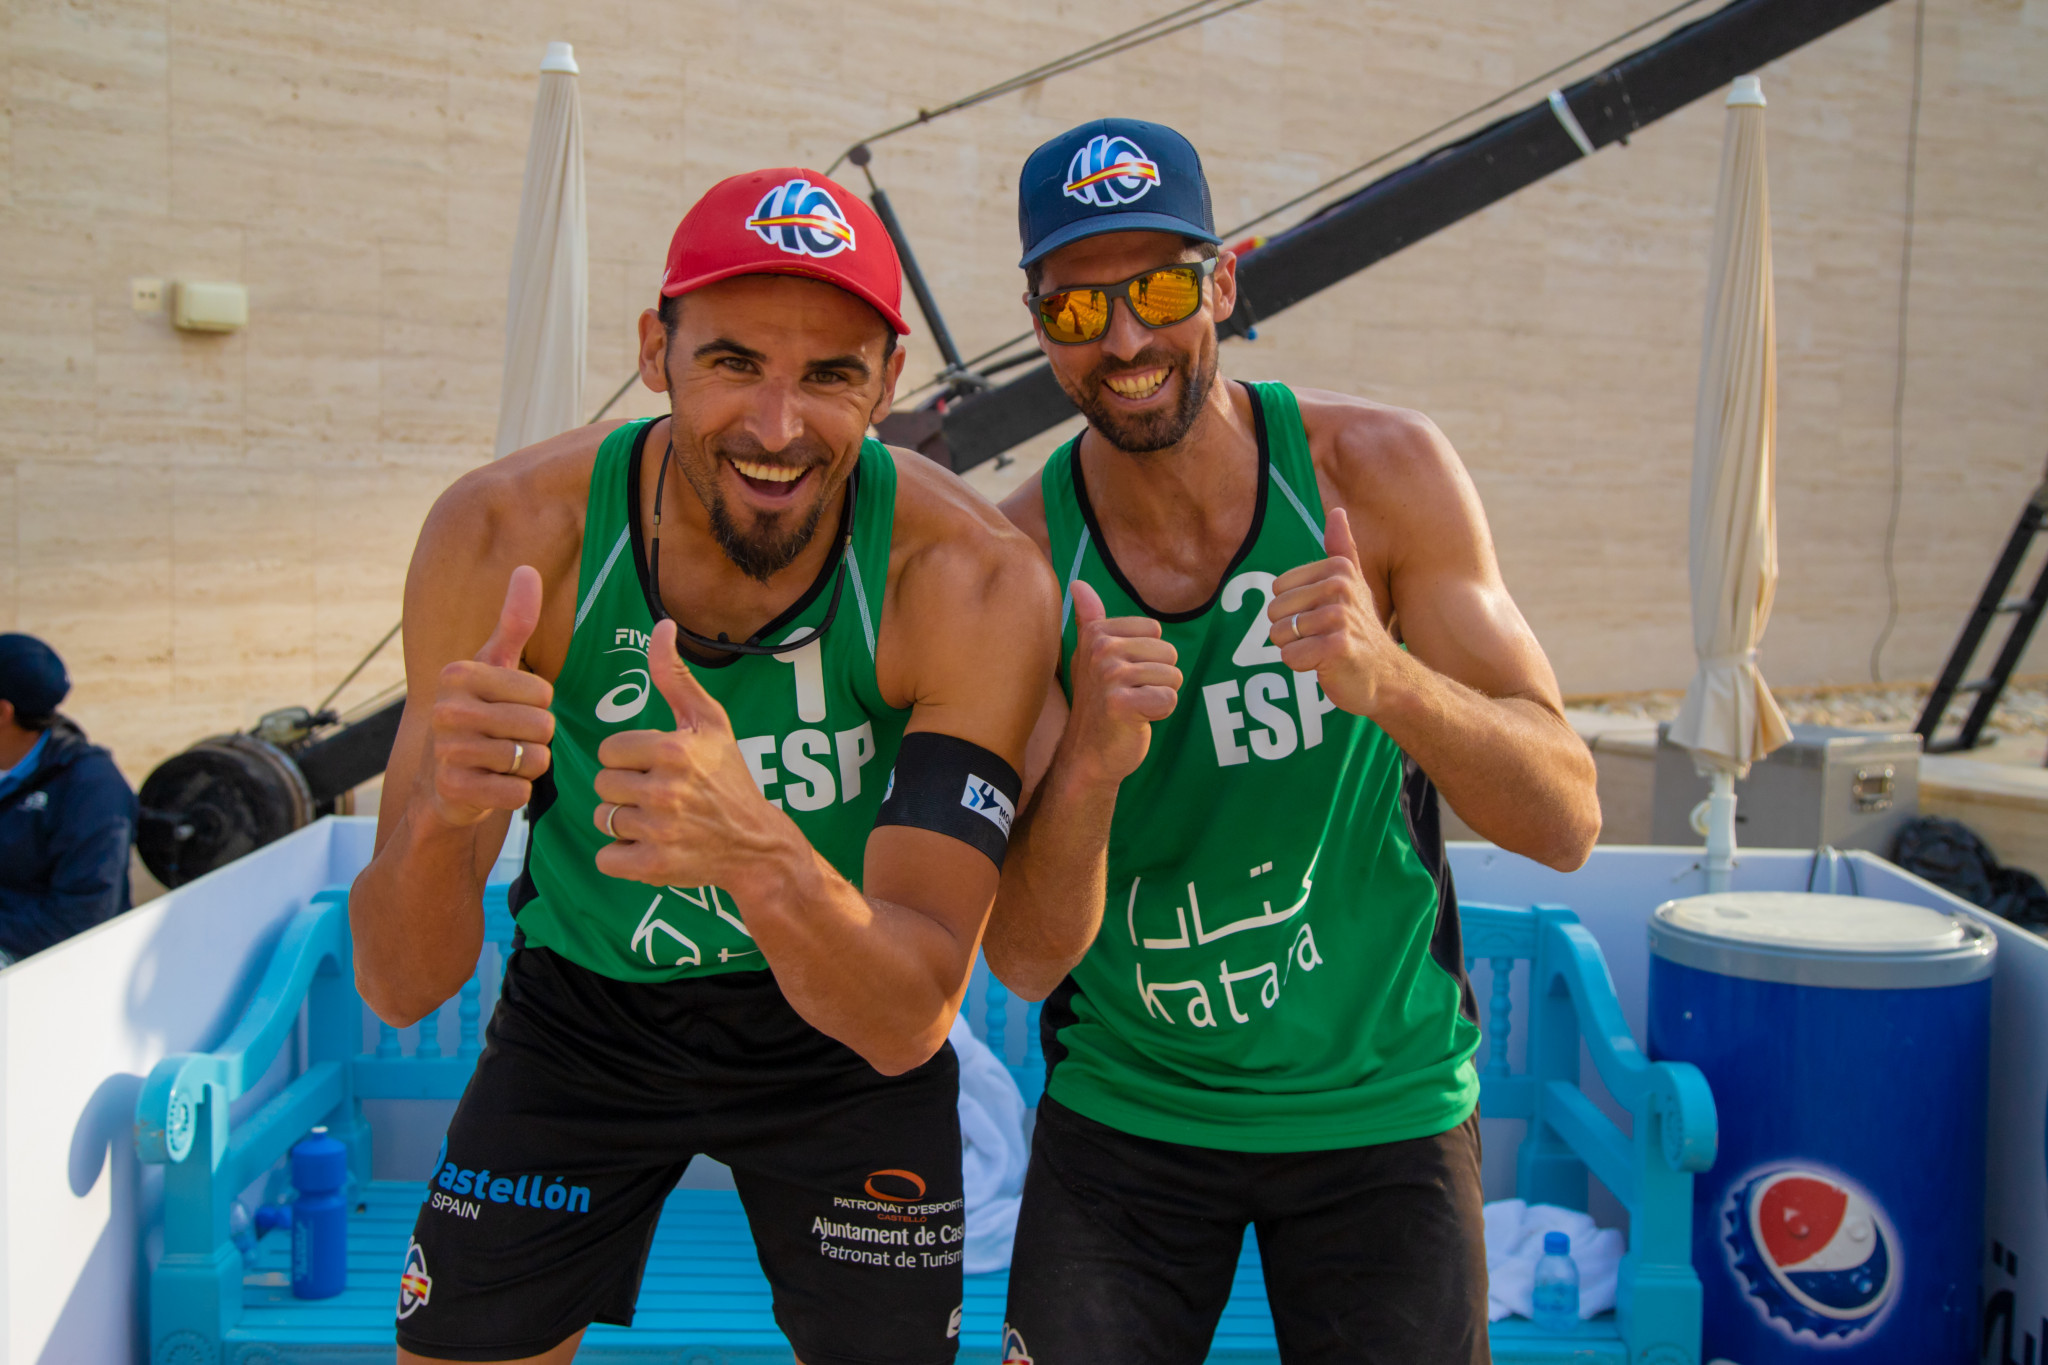 Spain's Pablo Herrera and Adrian Gavira have reached the quarter-finals at the FIVB Beach Volleyball World Tour event in Doha ©FIVB